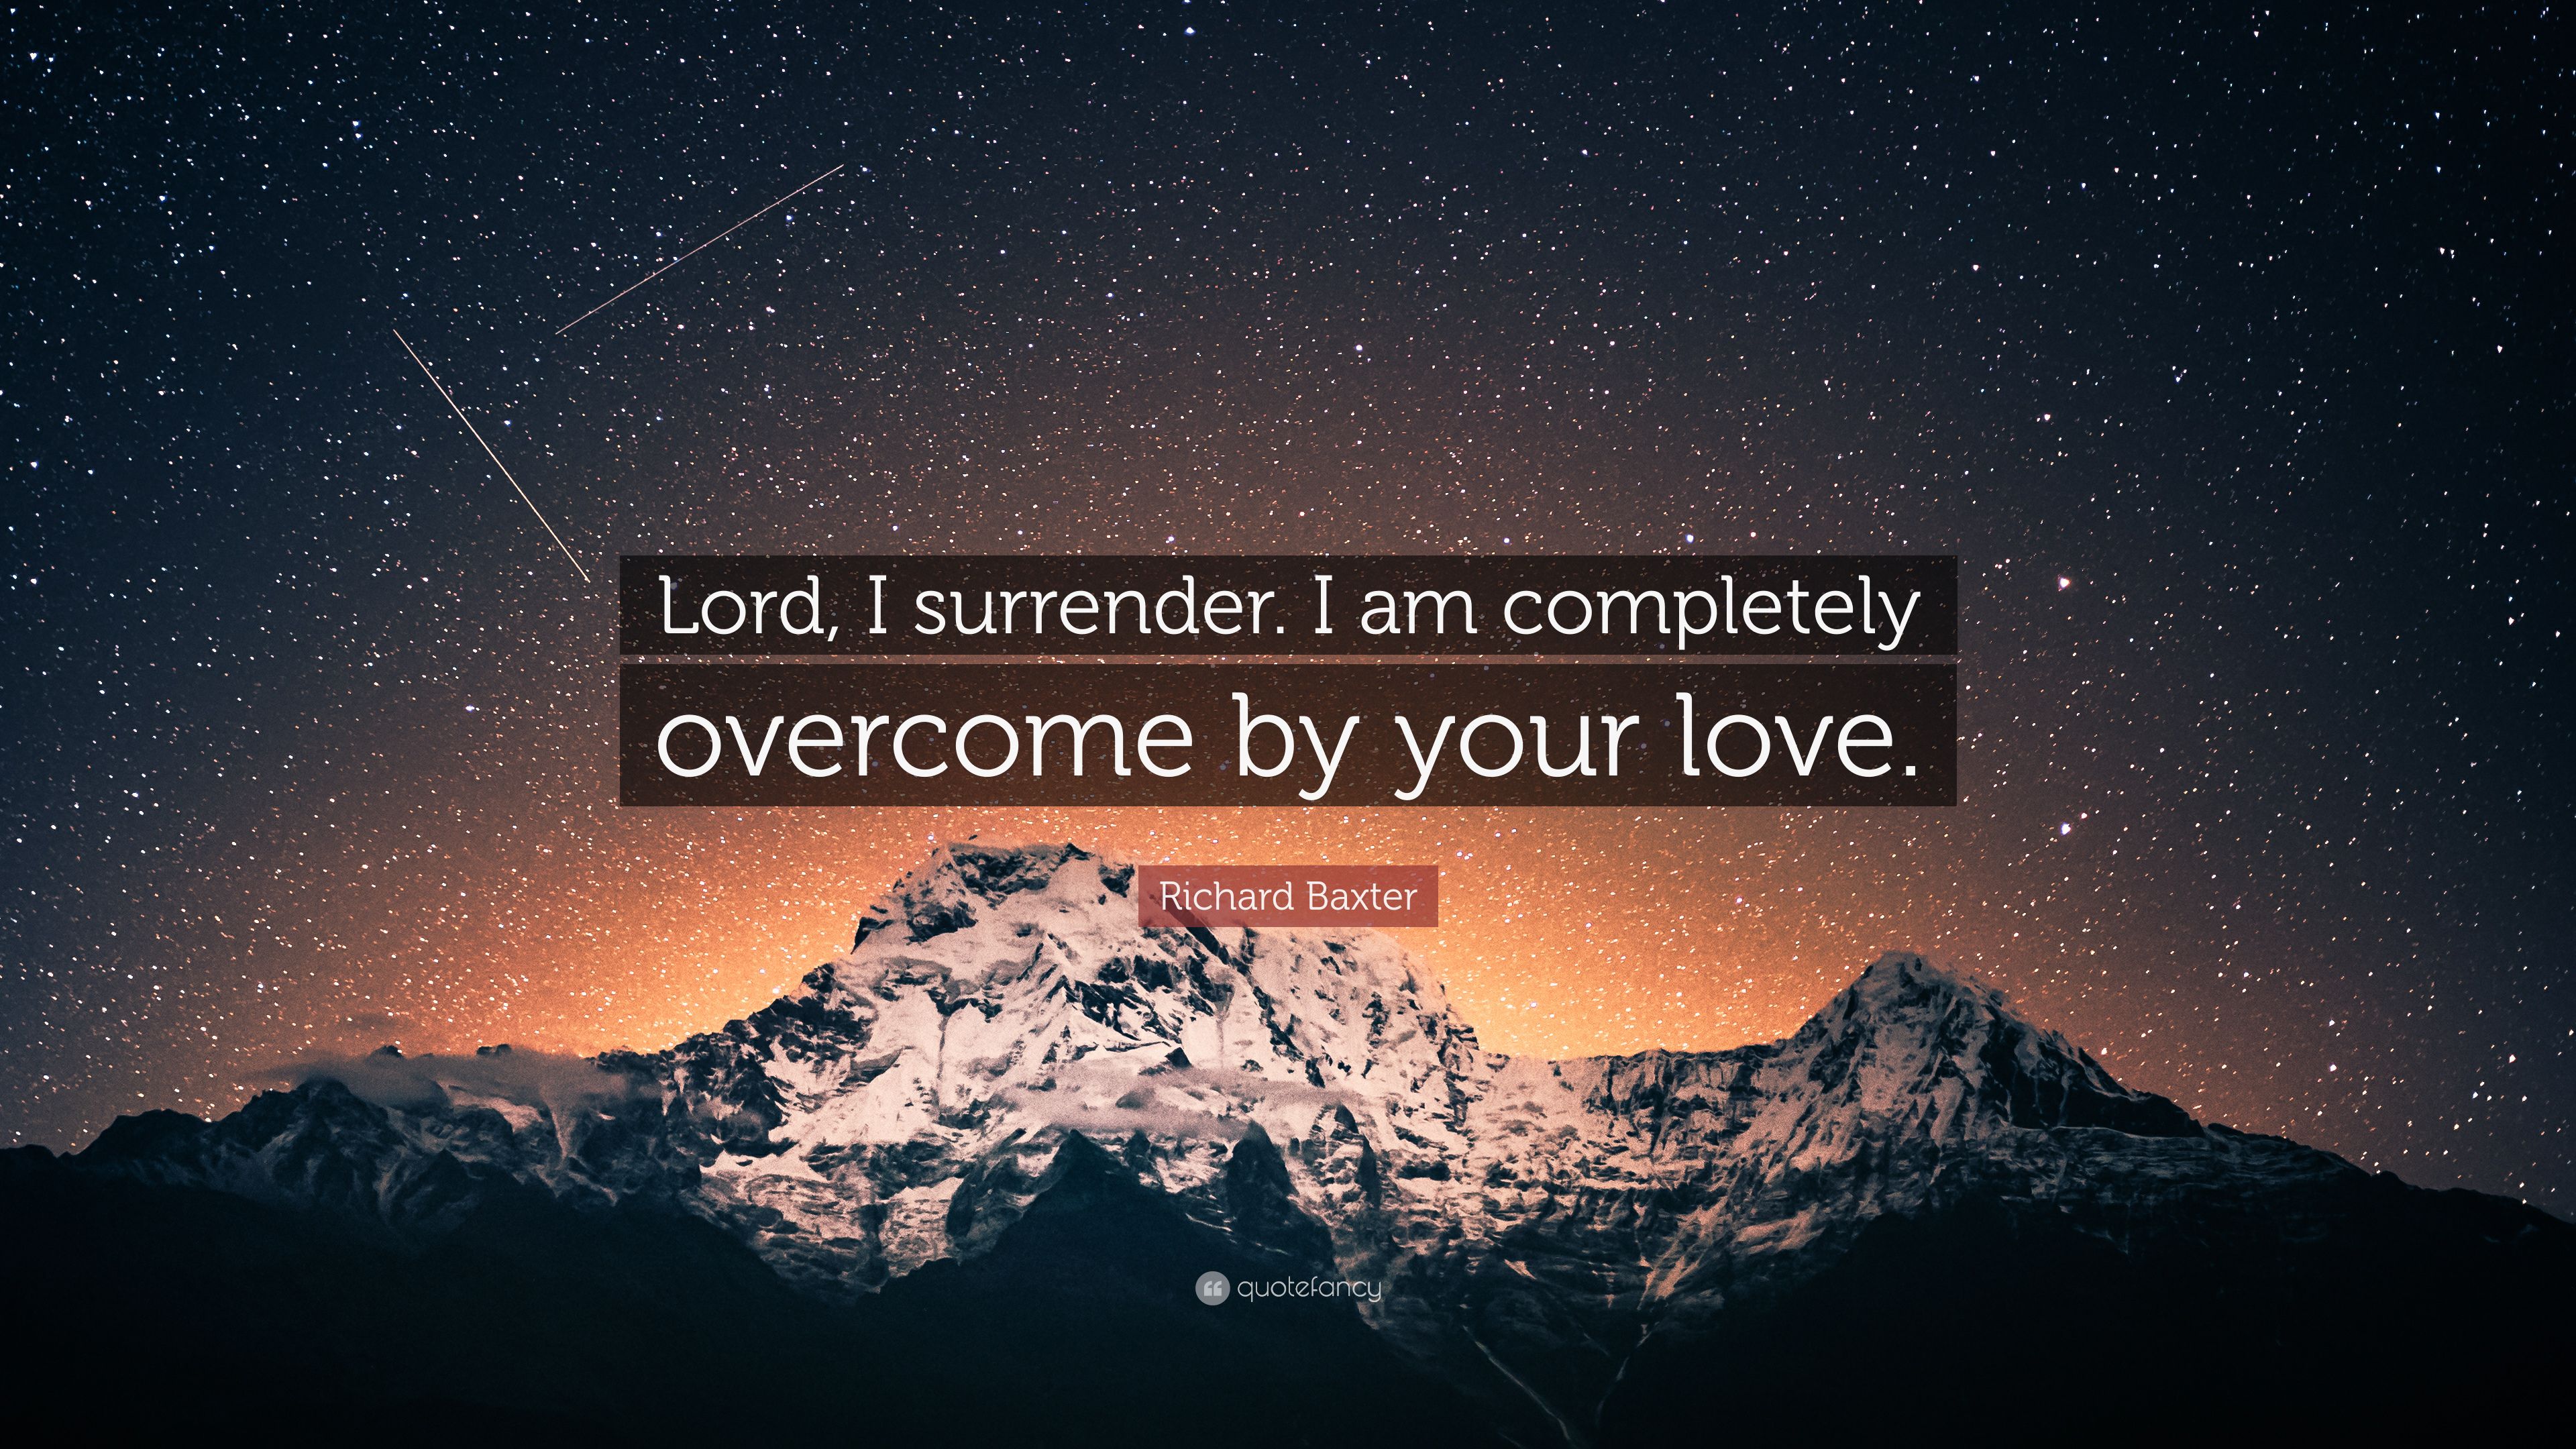 Richard Baxter Quote: “Lord, I surrender. I am completely overcome by your love.” (9 wallpaper)